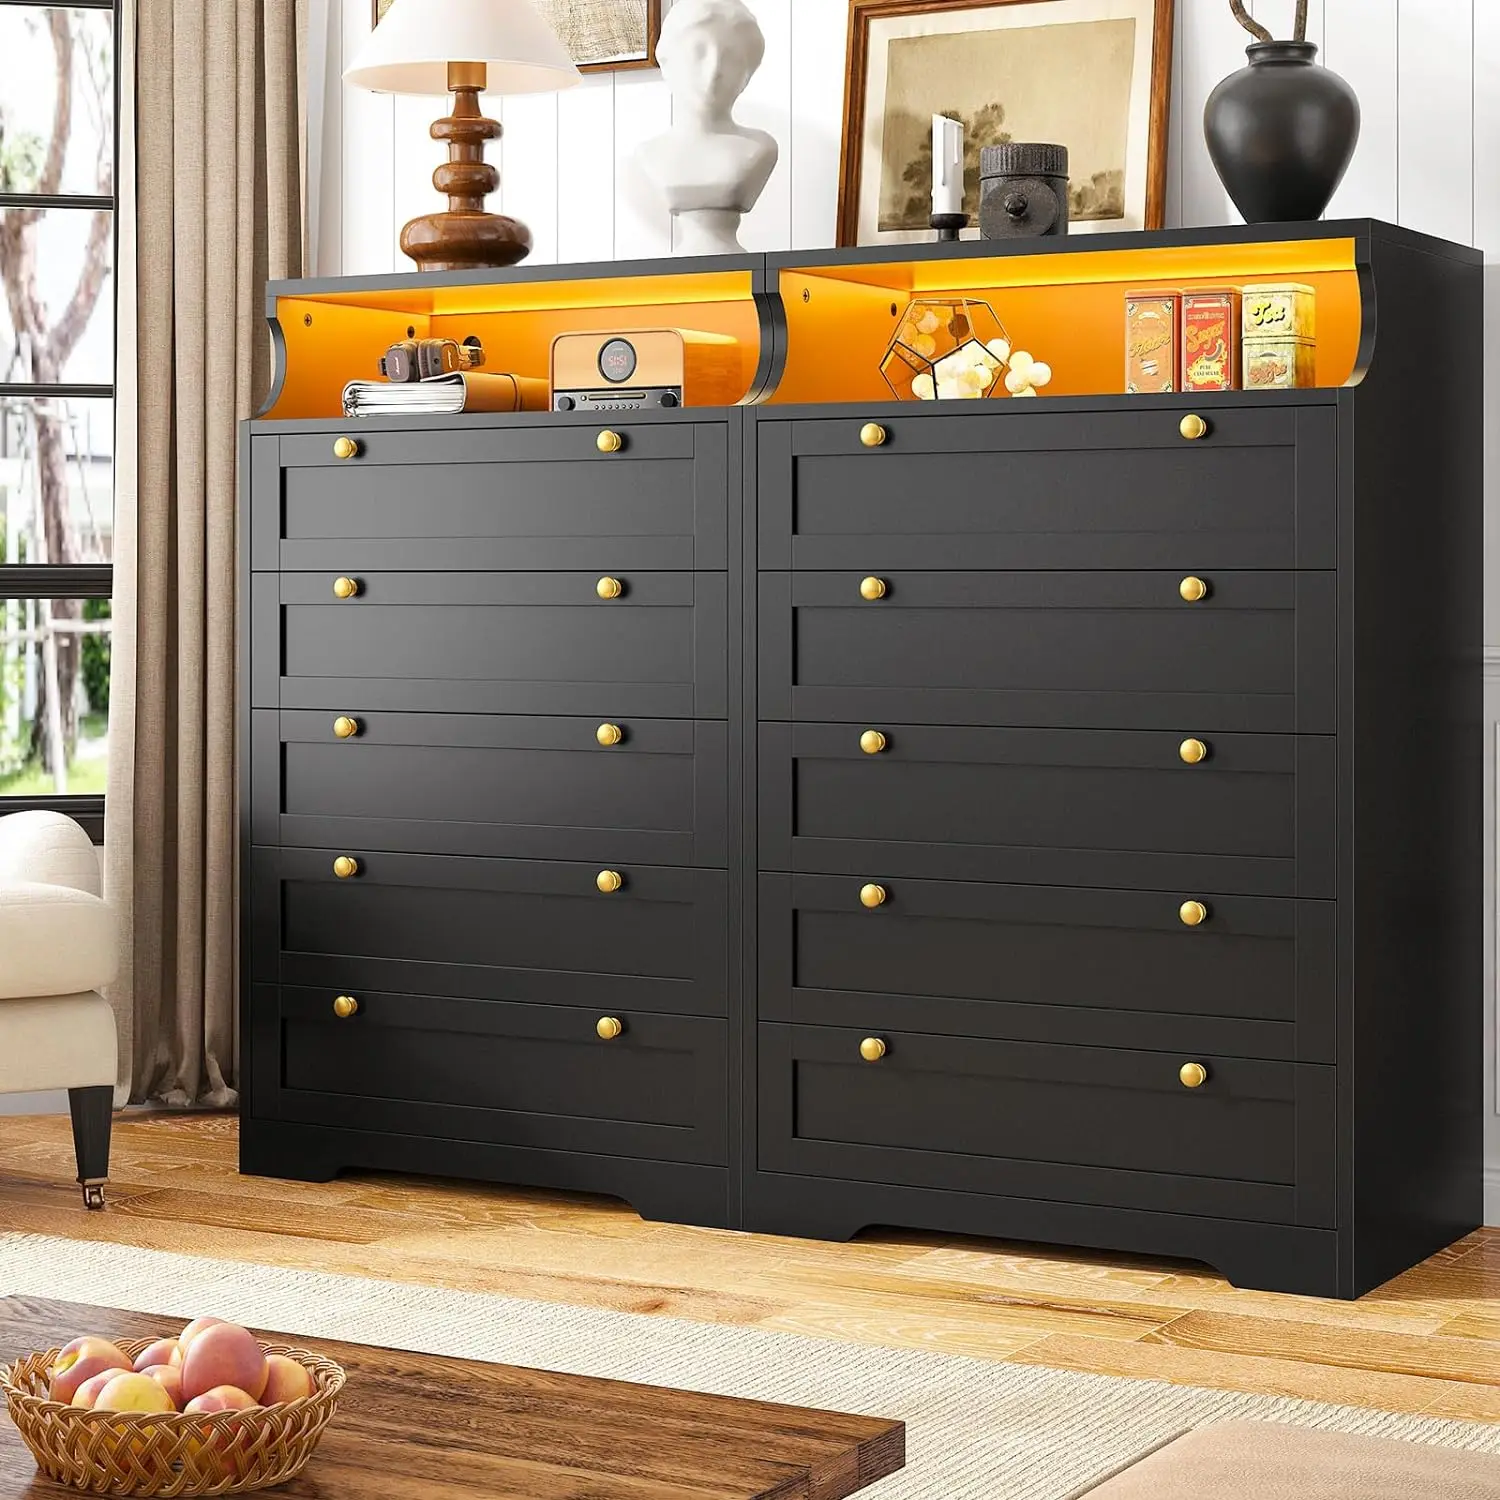 

Dresser for Bedroom with LED, Bedroom Dressers & Chests of Drawers, Tall Dresser with 5 Wood Drawers and Metal Handles 48.4" H